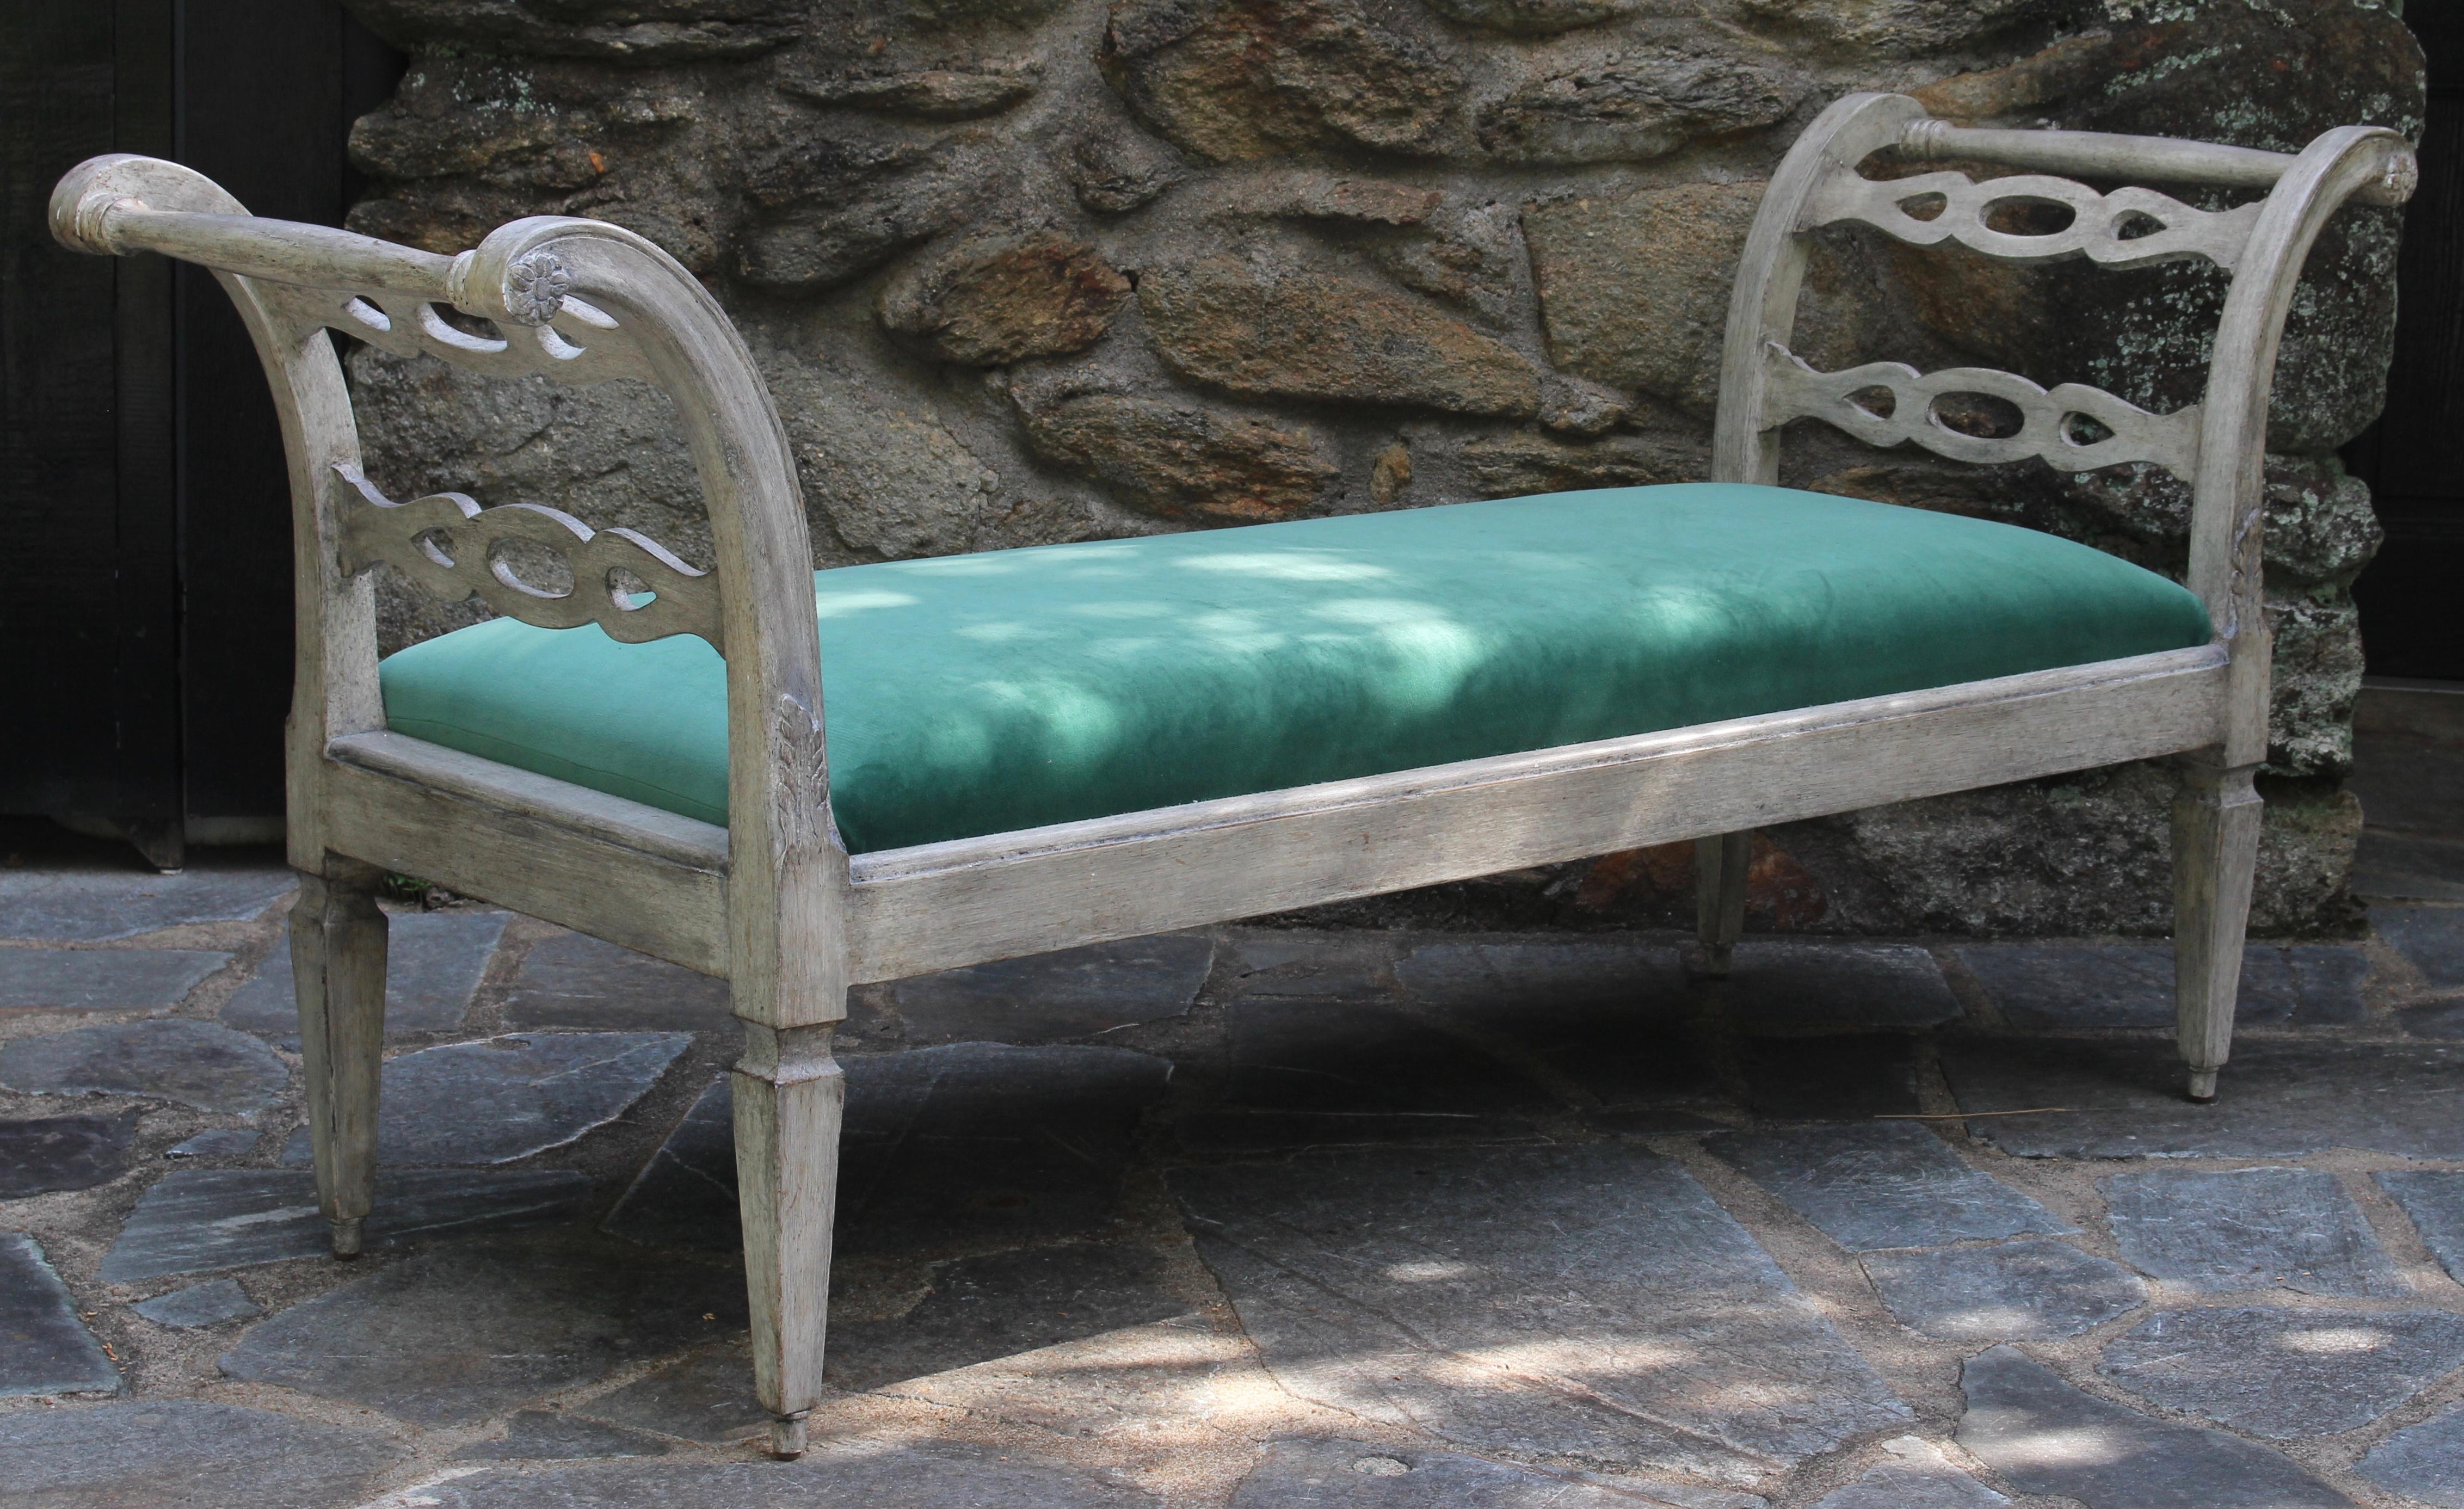 An elegant late 20th century painted and carved Gustavian style bench or window seat upholstered in an emerald green velvet.